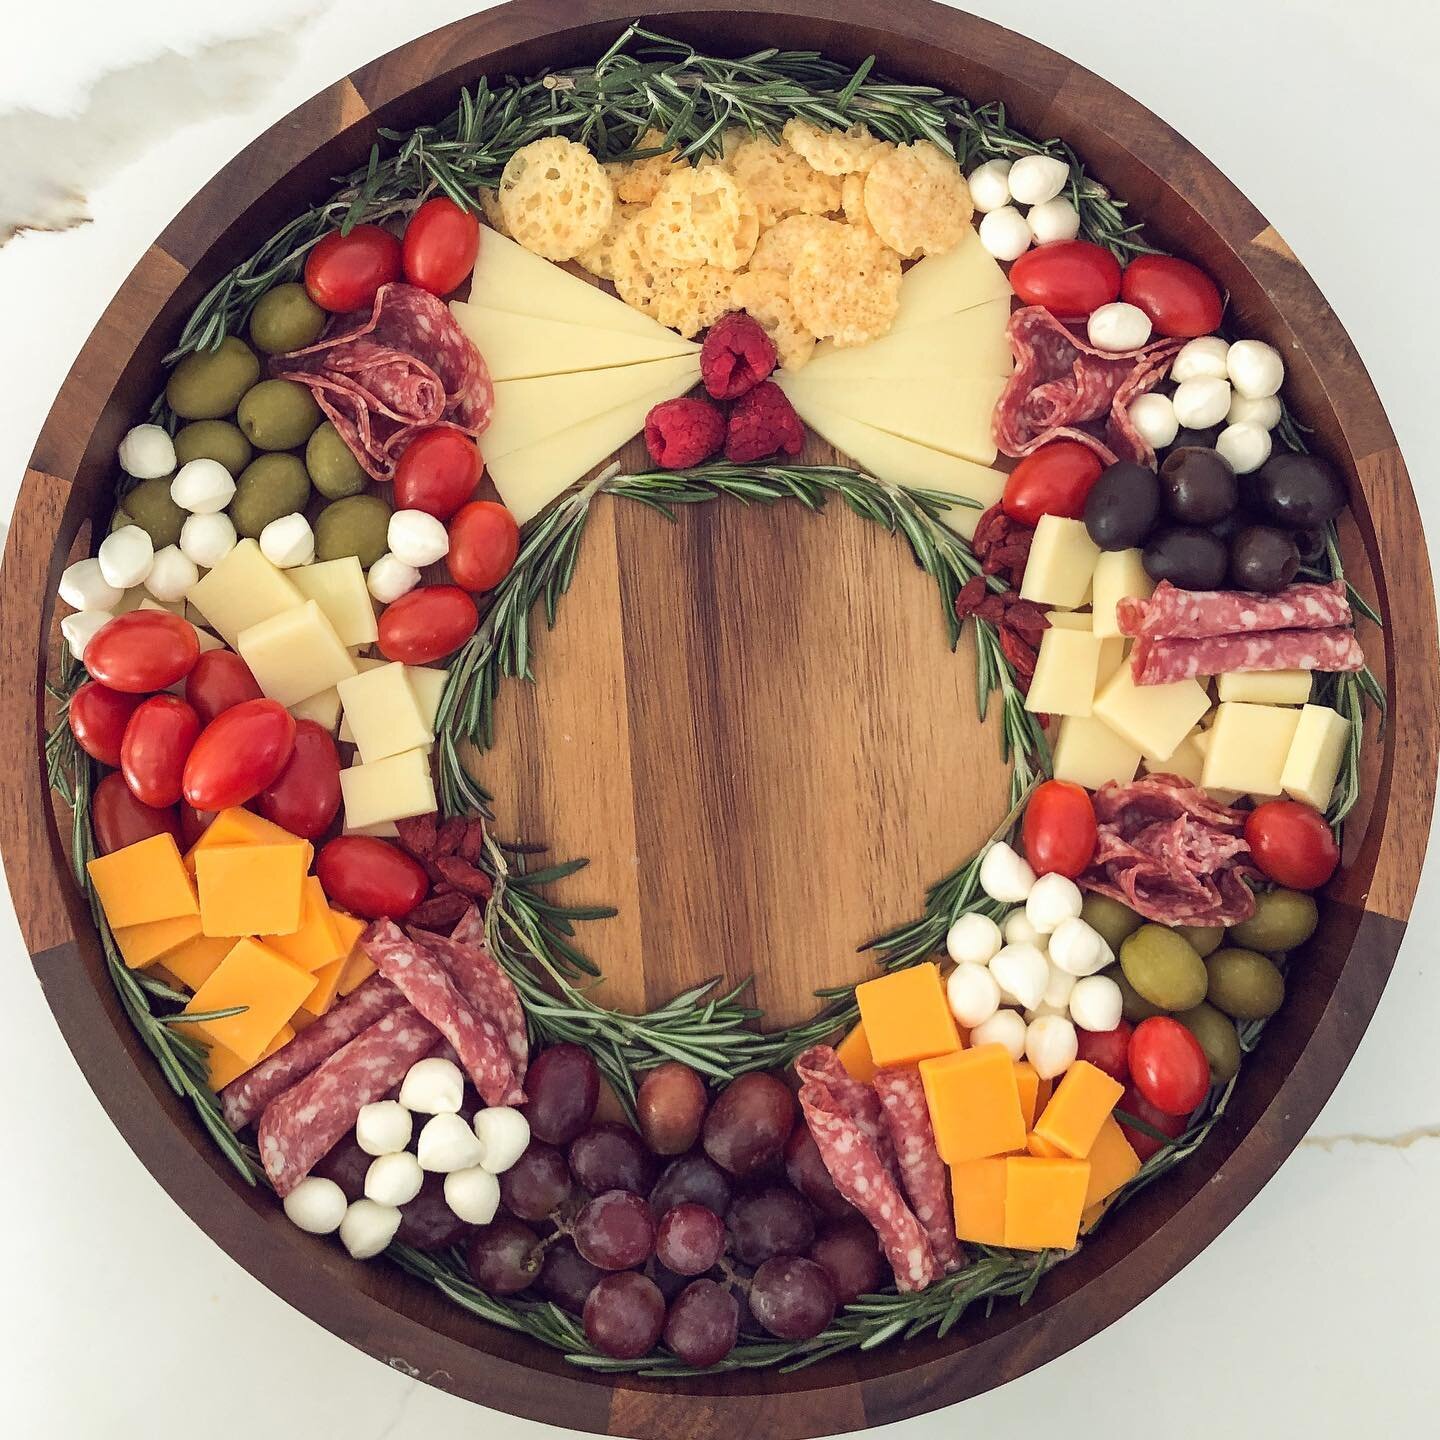 Mini Charcuterie Wreath🎄tasty + trendy app for entertaining at home this holiday season! TIP: Serve on top of flat ice packs to keep cool + fresh.